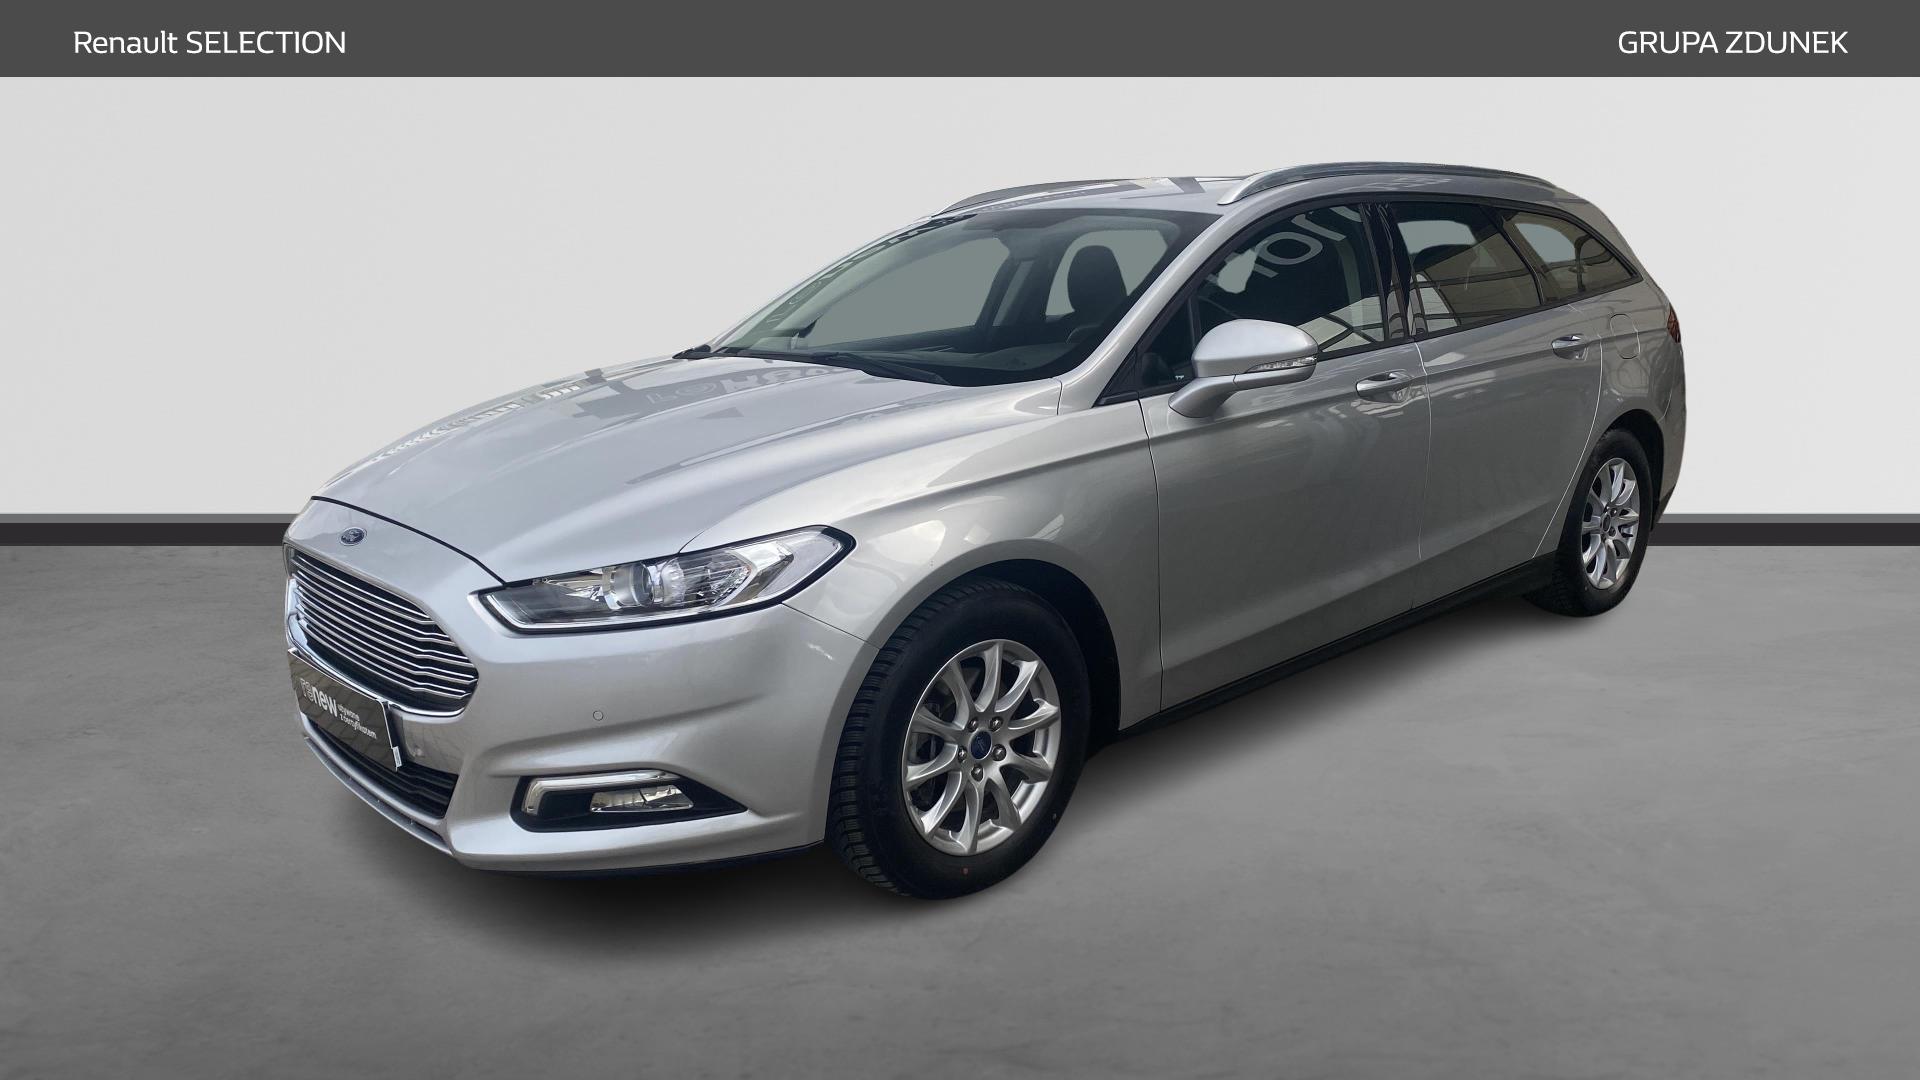 Ford MONDEO Mondeo 2.0 TDCi Ambiente 2017